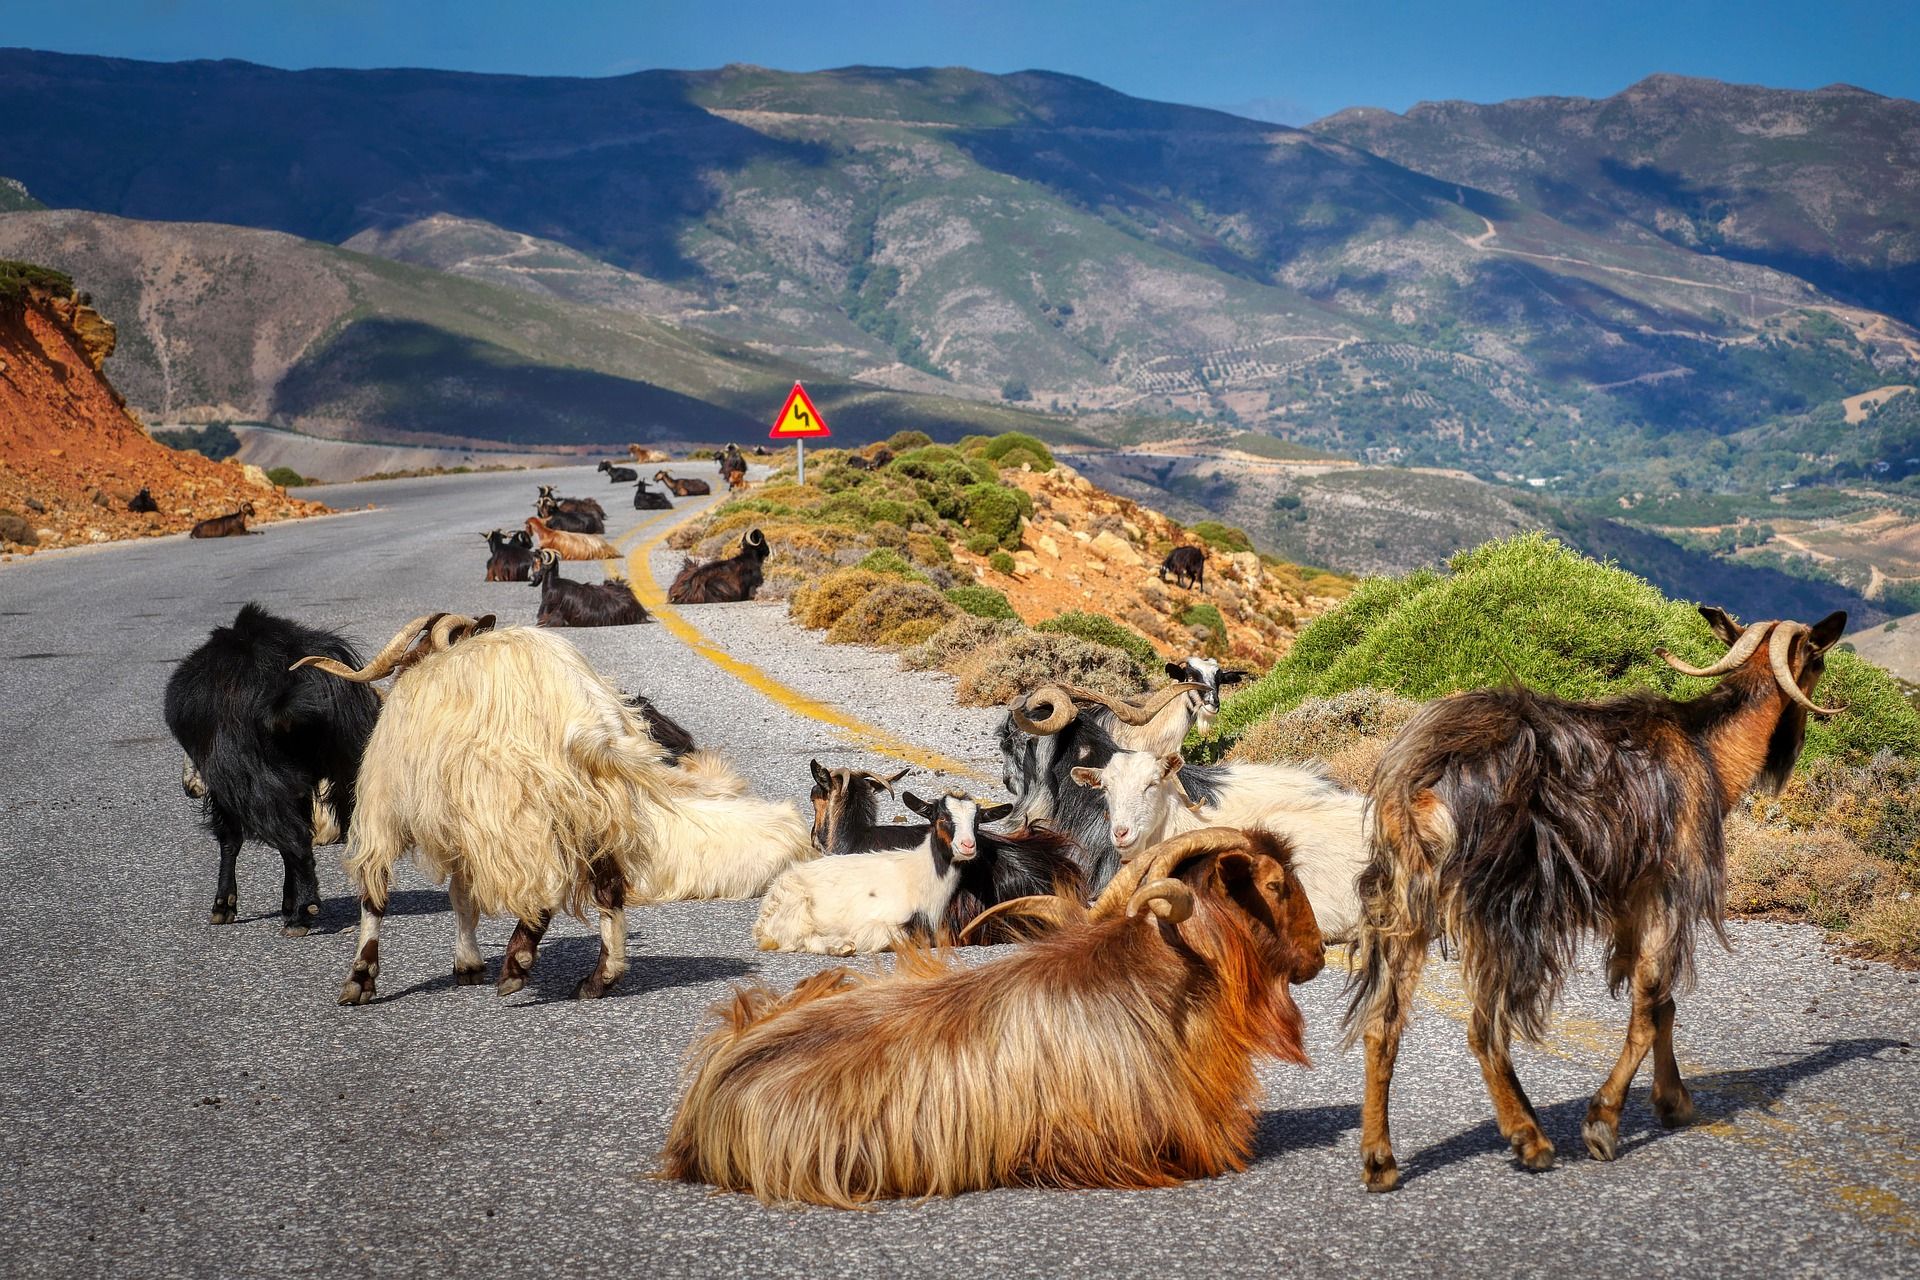 Goats resting in the middle of the road (a common occurrence) on the island of Crete, Greece